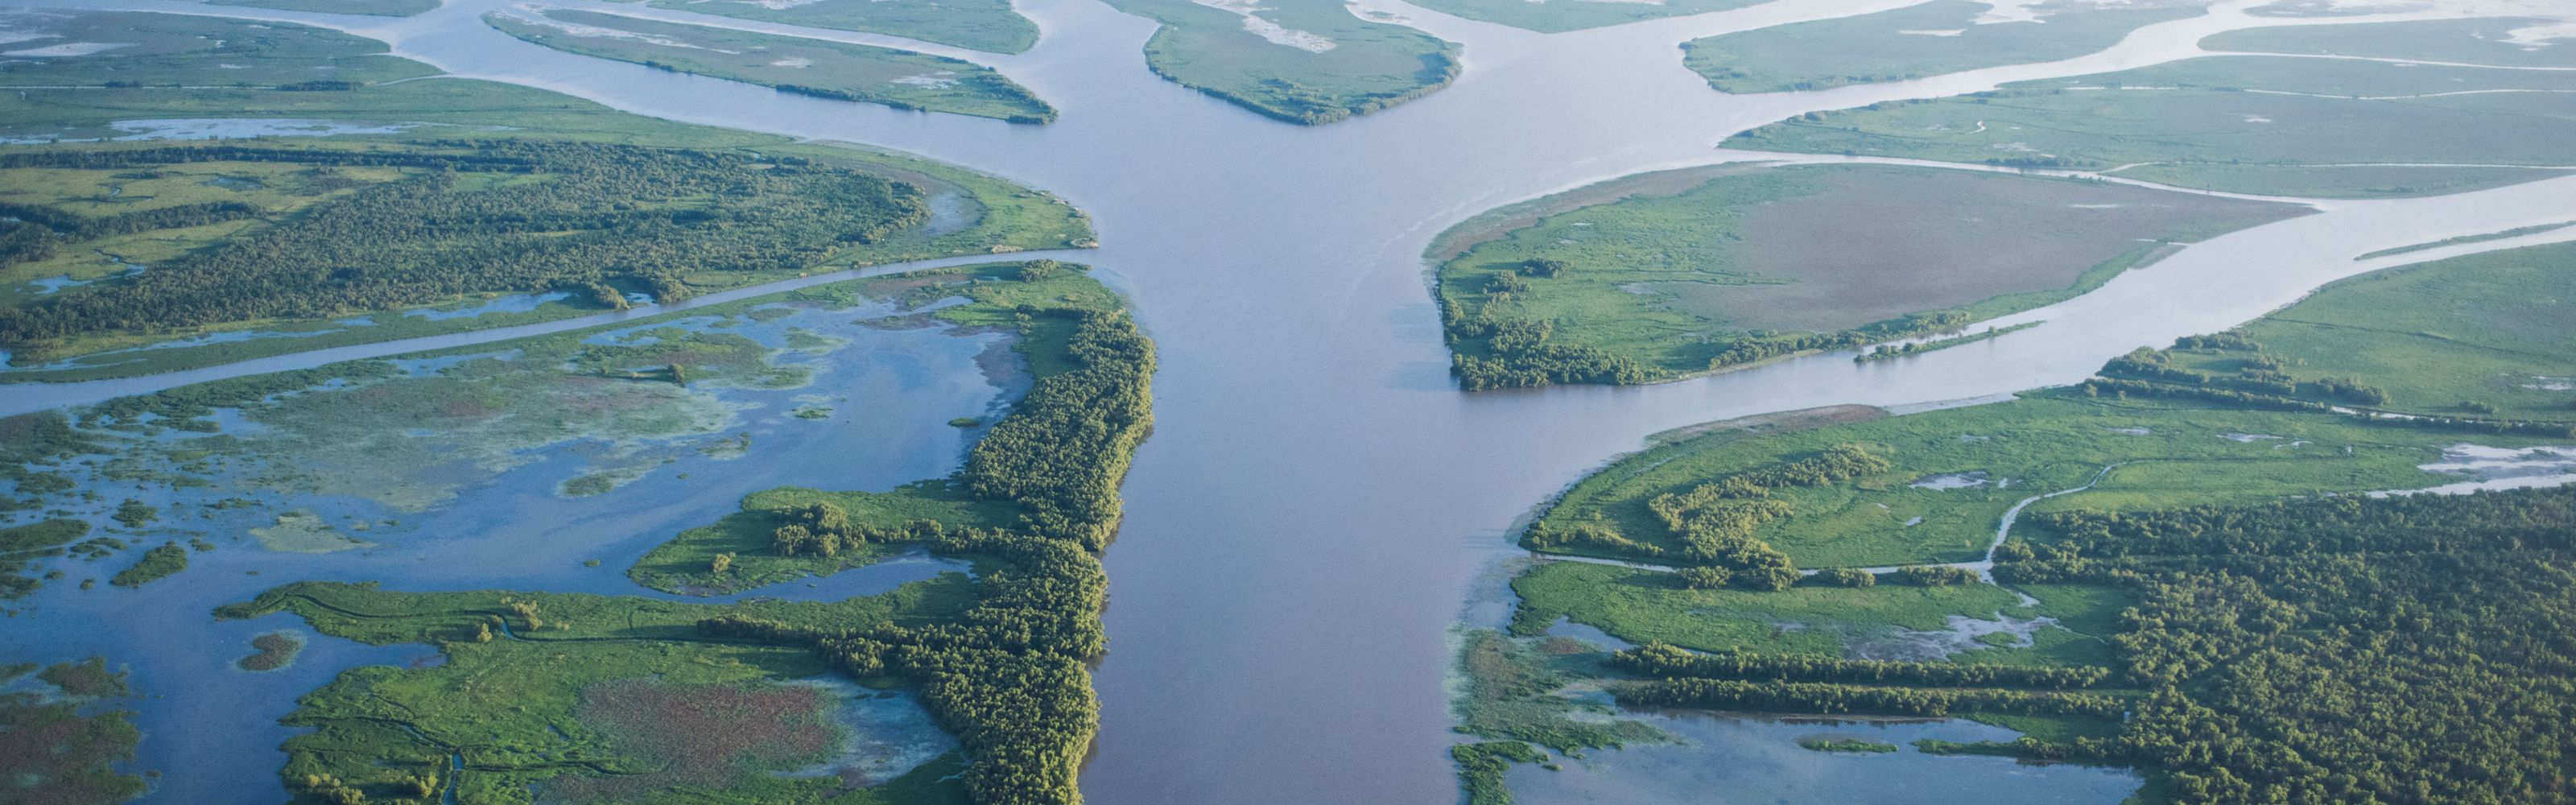 Aerial view of many canals winding through marshland of the Wax Lake Delta in Louisiana heading out to the Gulf of Mexico.